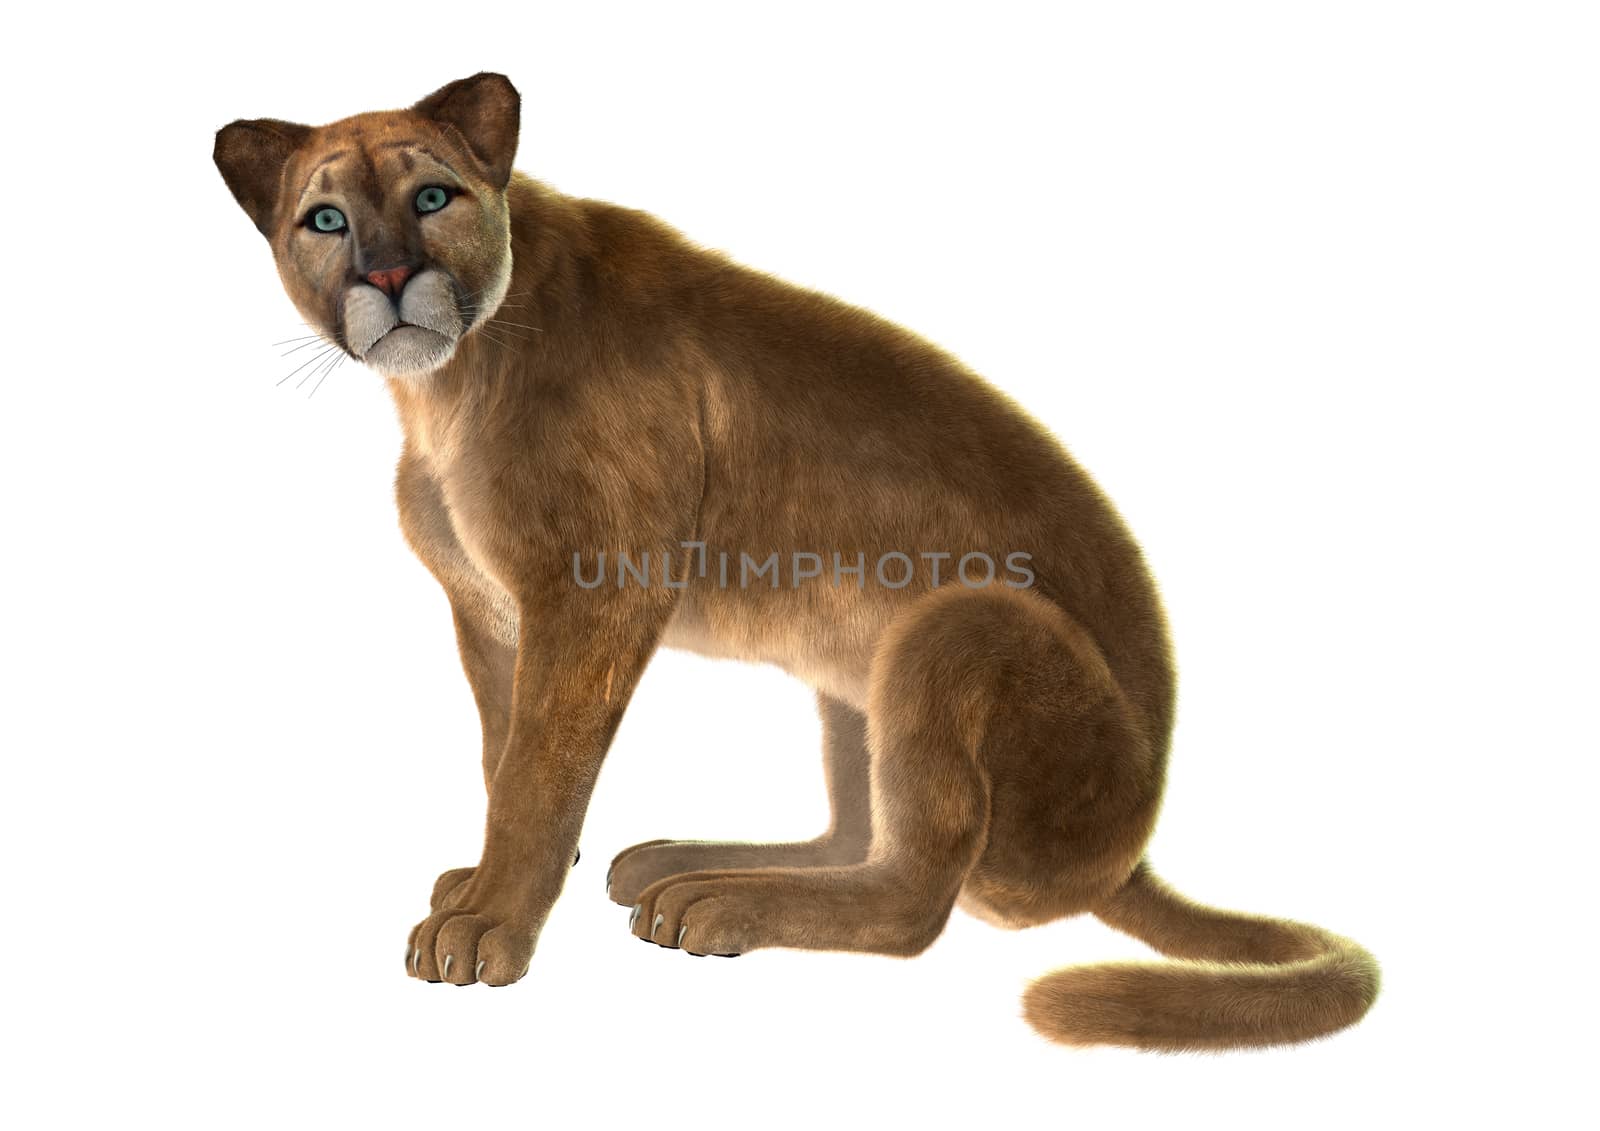 3D digital render of a sitting puma, also known as a cougar, mountain lion, or catamount, isolated on white background